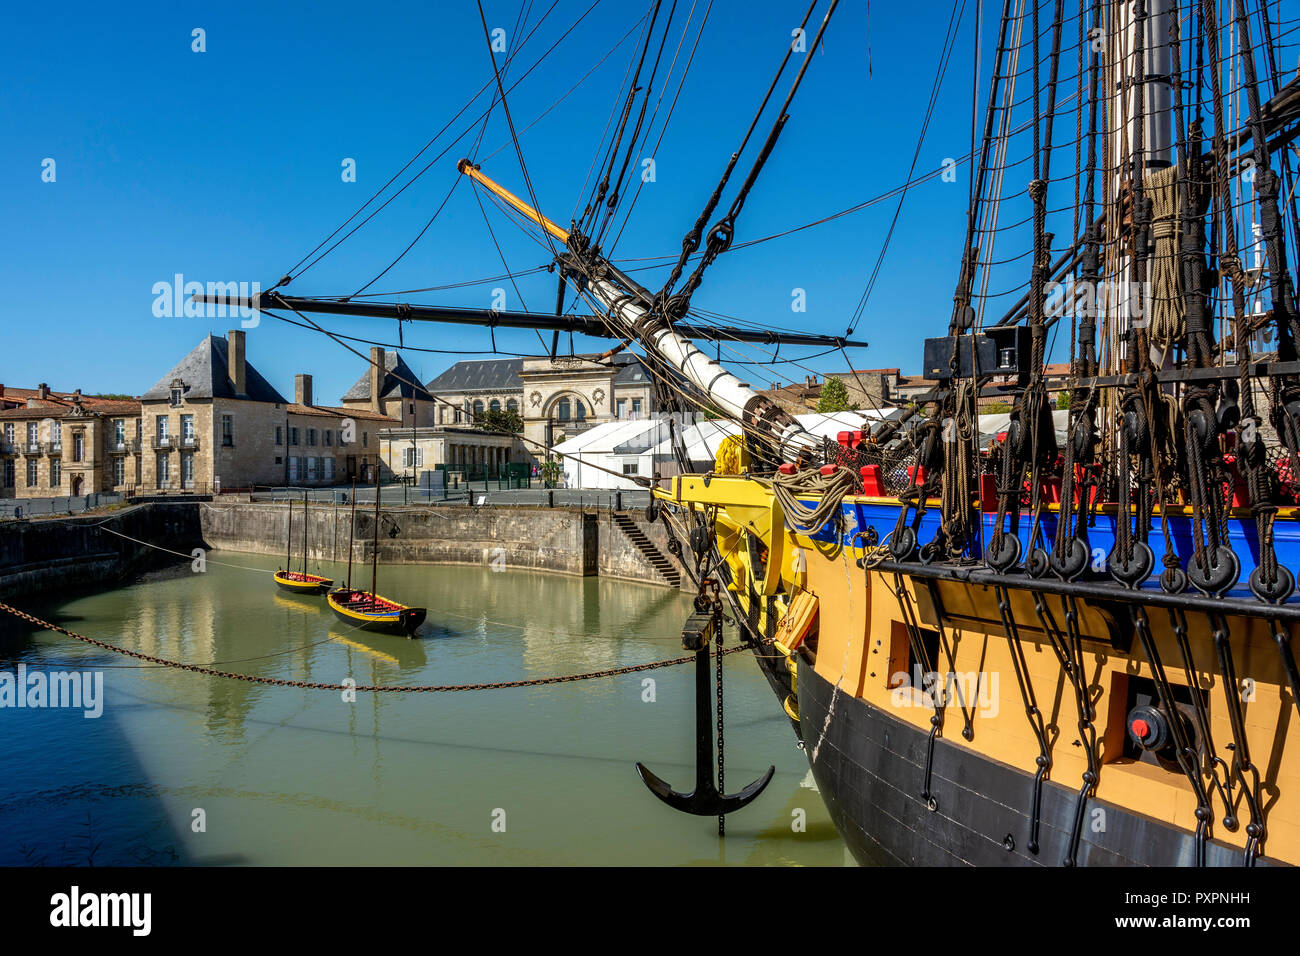 Replica of French frigate l'Hermione in her dock at the Arsenal of Rochefort, Charente Maritime, Nouvelle-Aquitaine, France Stock Photo